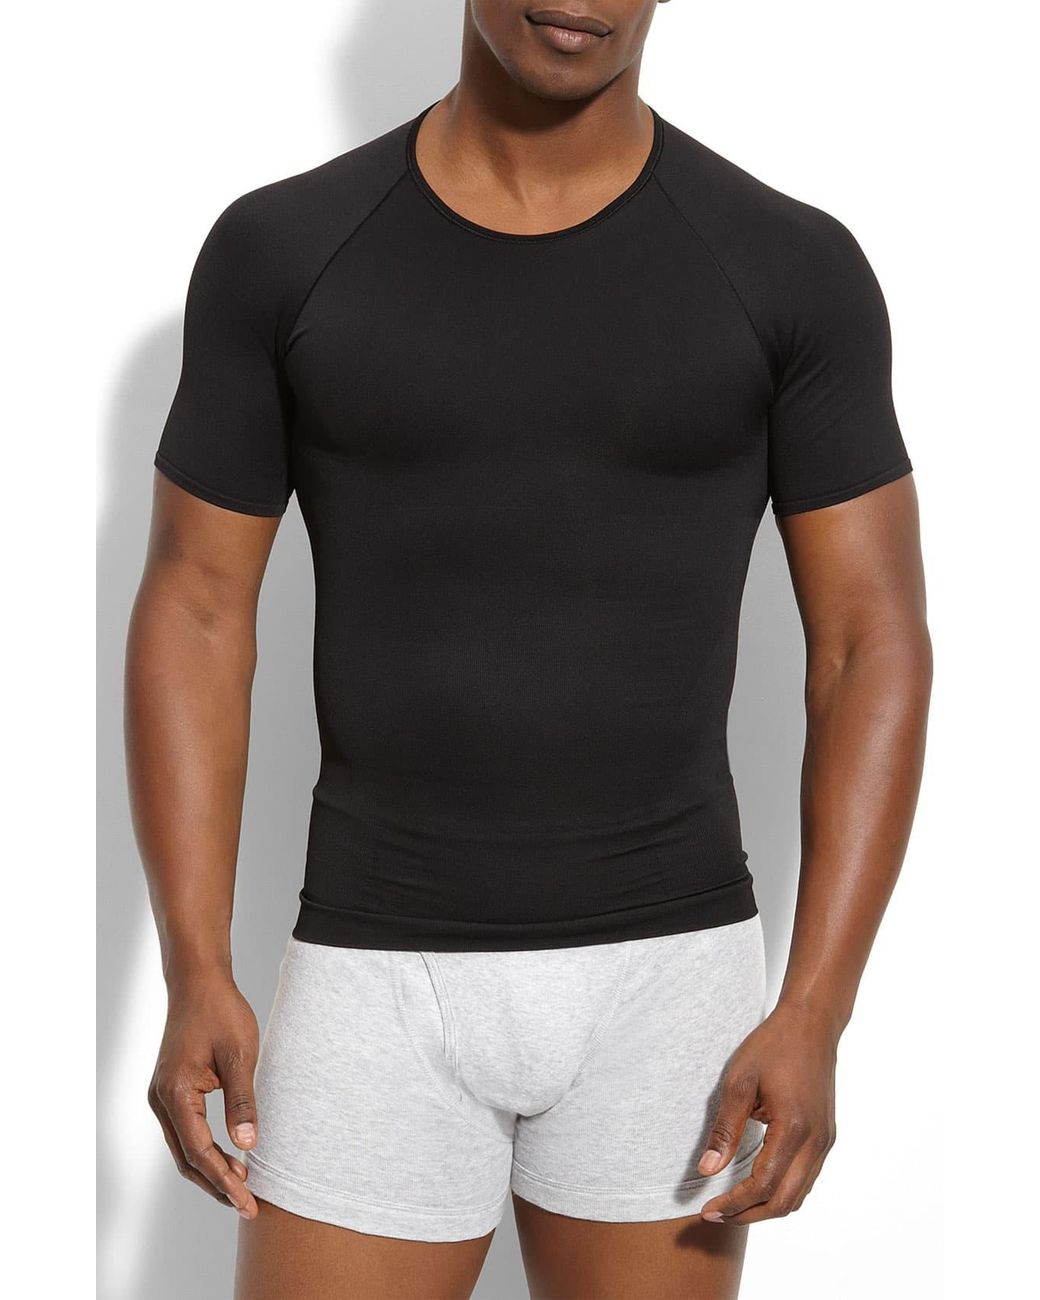 Spanx Spanx Zoned Performance Crewneck T-shirt in Black for Men - Lyst